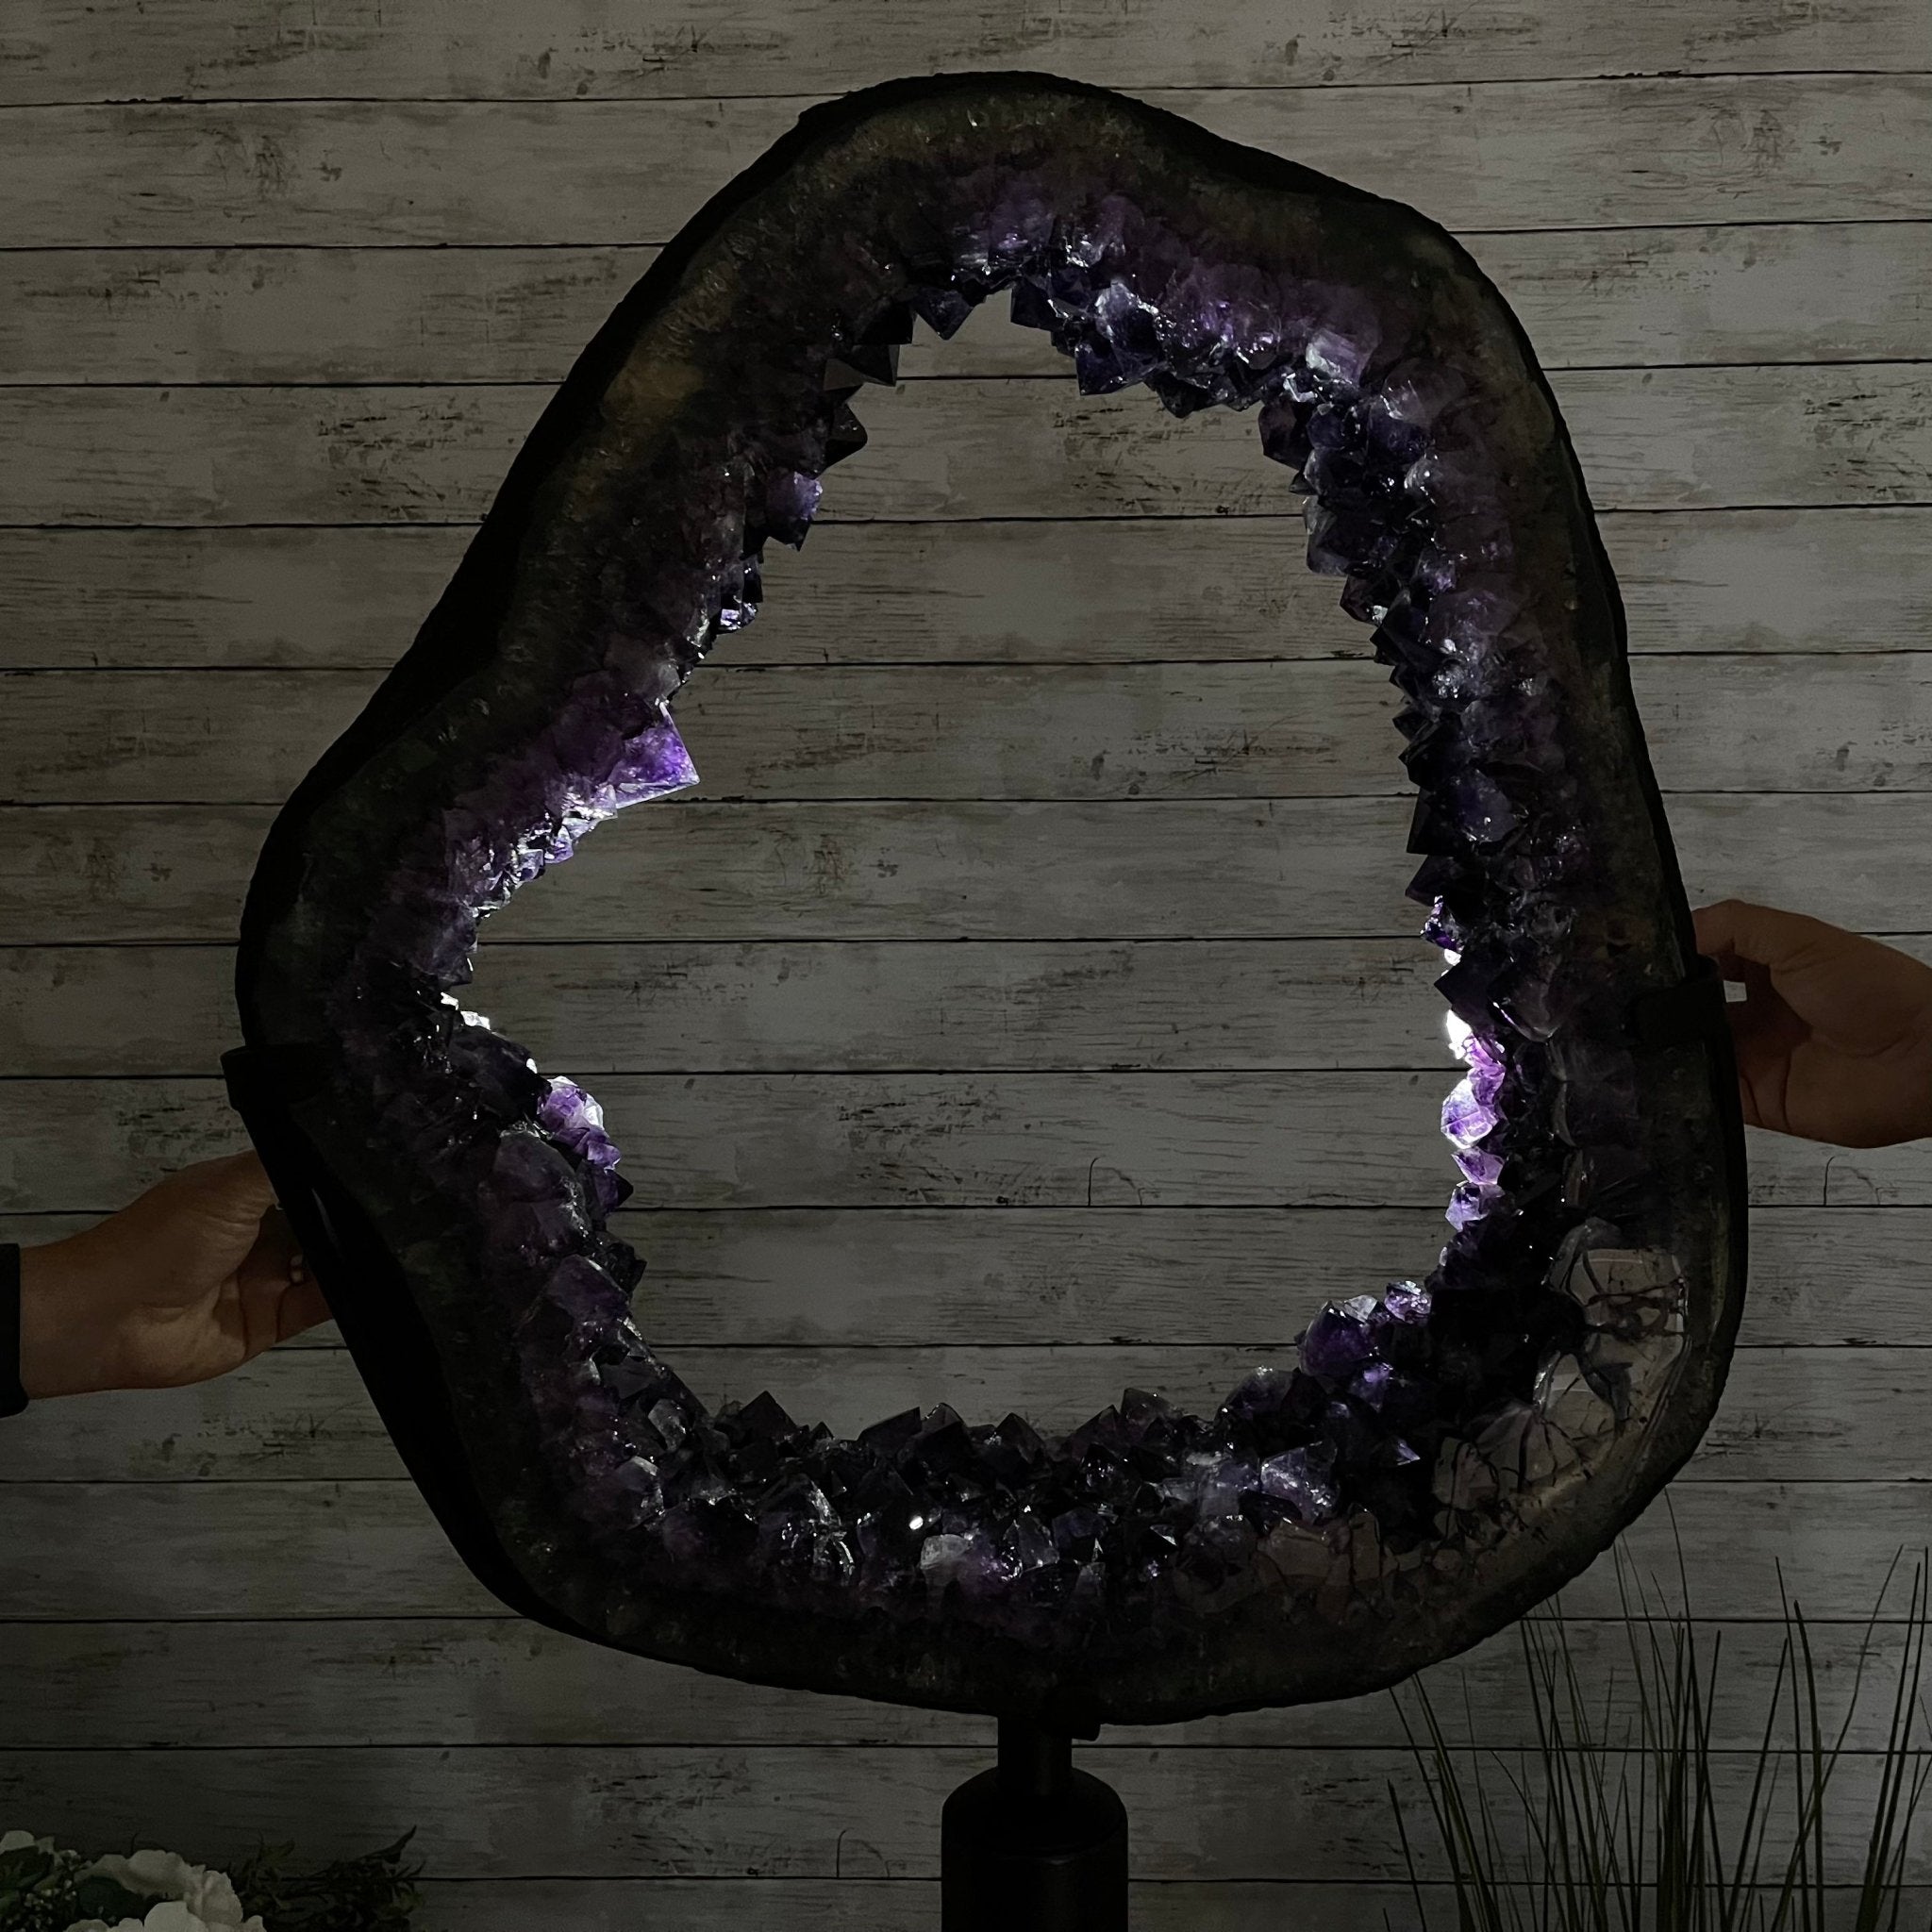 Super Quality Brazilian Amethyst Crystal Portal on a Tall Rotating Stand, 114.7 lbs & 70.5" tall Model #5604-0102 by Brazil Gems - Brazil GemsBrazil GemsSuper Quality Brazilian Amethyst Crystal Portal on a Tall Rotating Stand, 114.7 lbs & 70.5" tall Model #5604-0102 by Brazil GemsPortals on Rotating Bases5604-0102